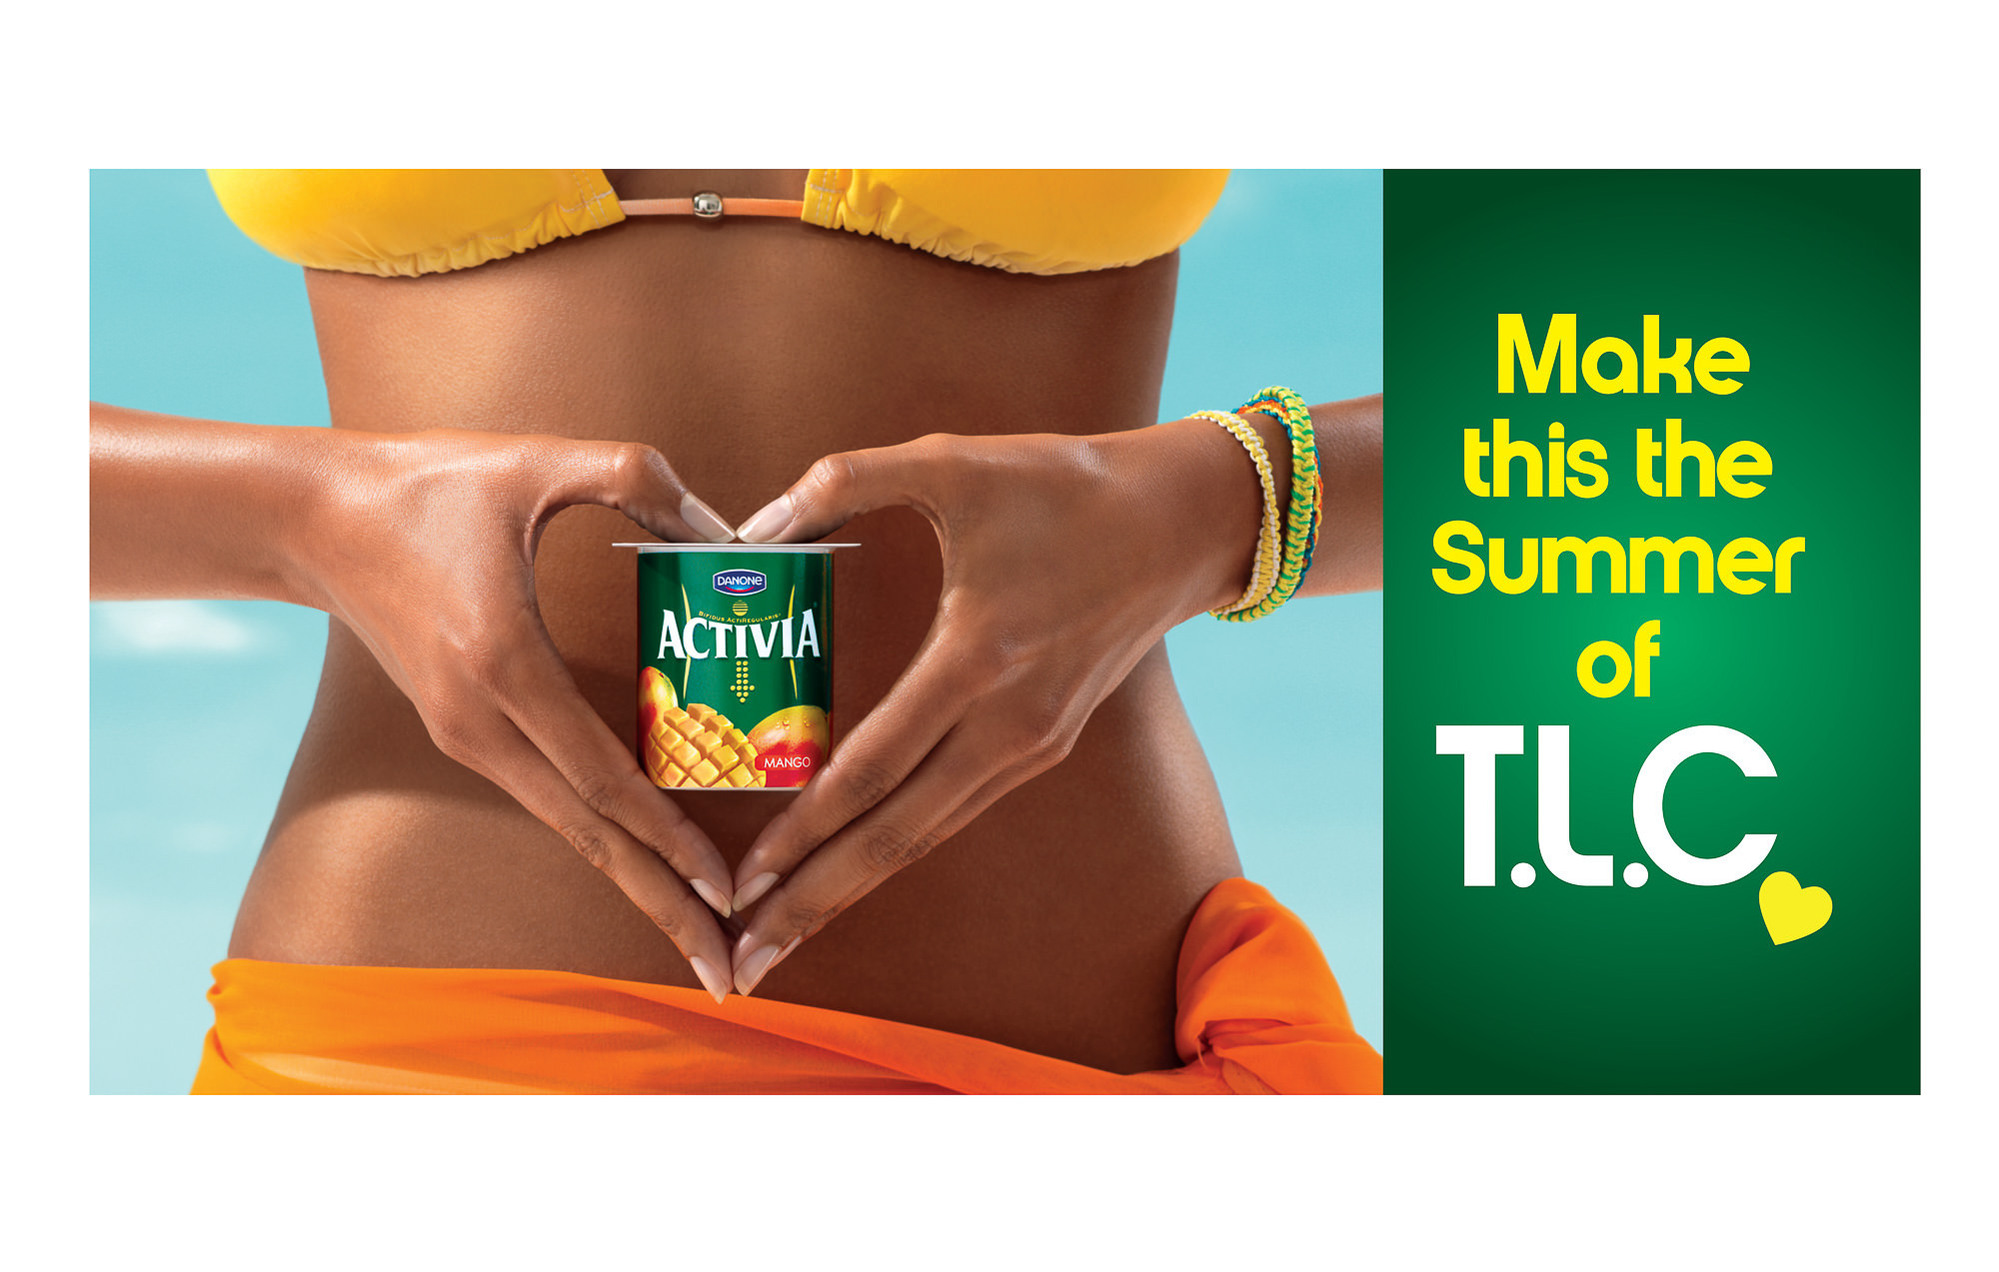 Activia campaign Photography by commercial, product & advertising photographer Timothy Hogan in studio Los Angeles